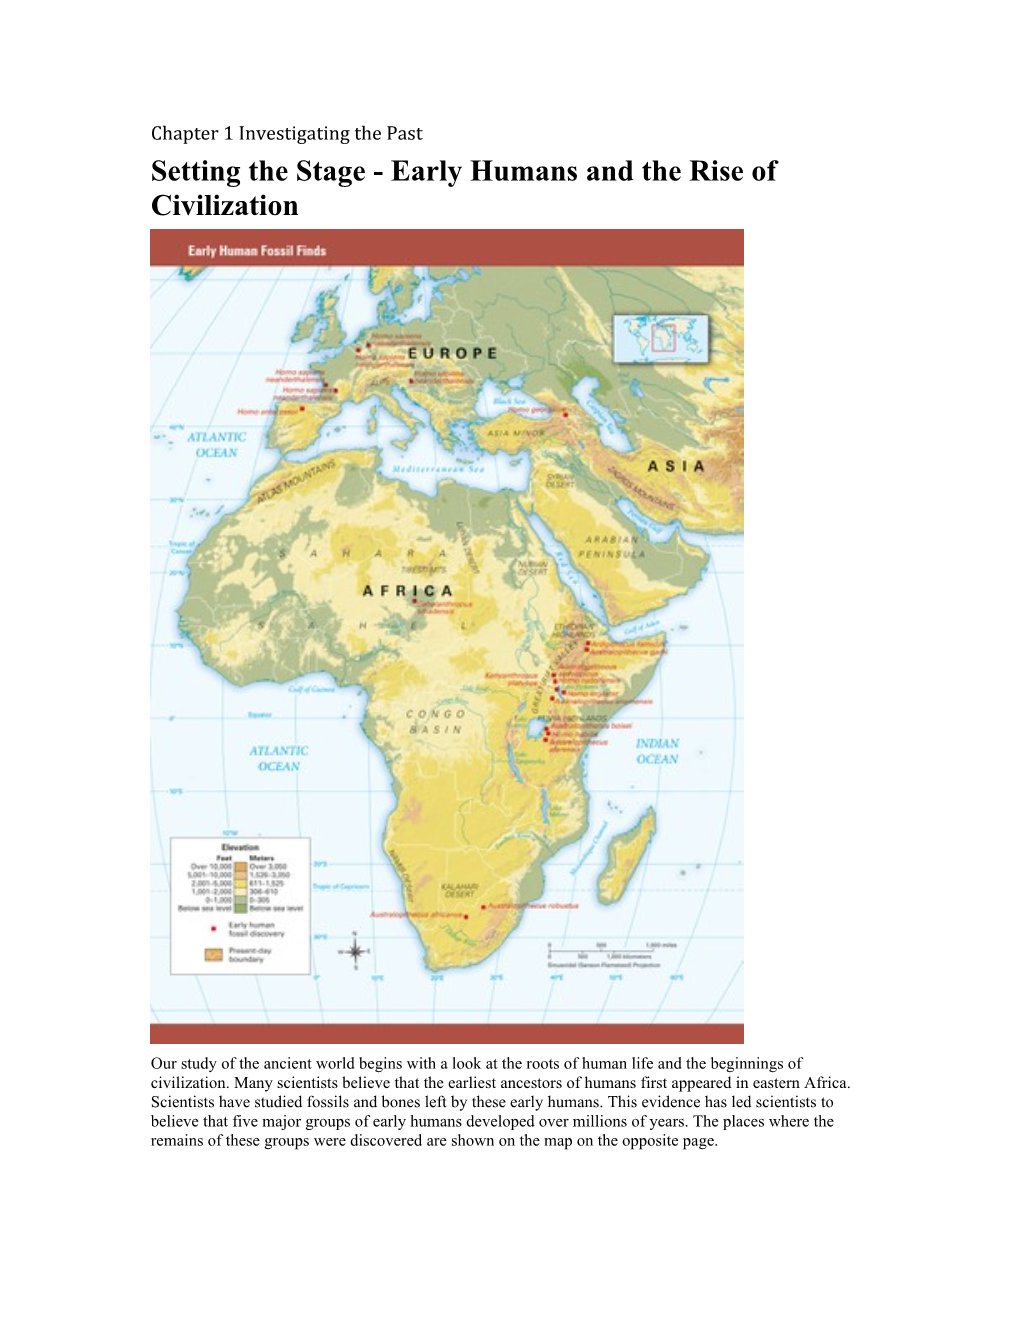 Setting the Stage - Early Humans and the Rise of Civilization